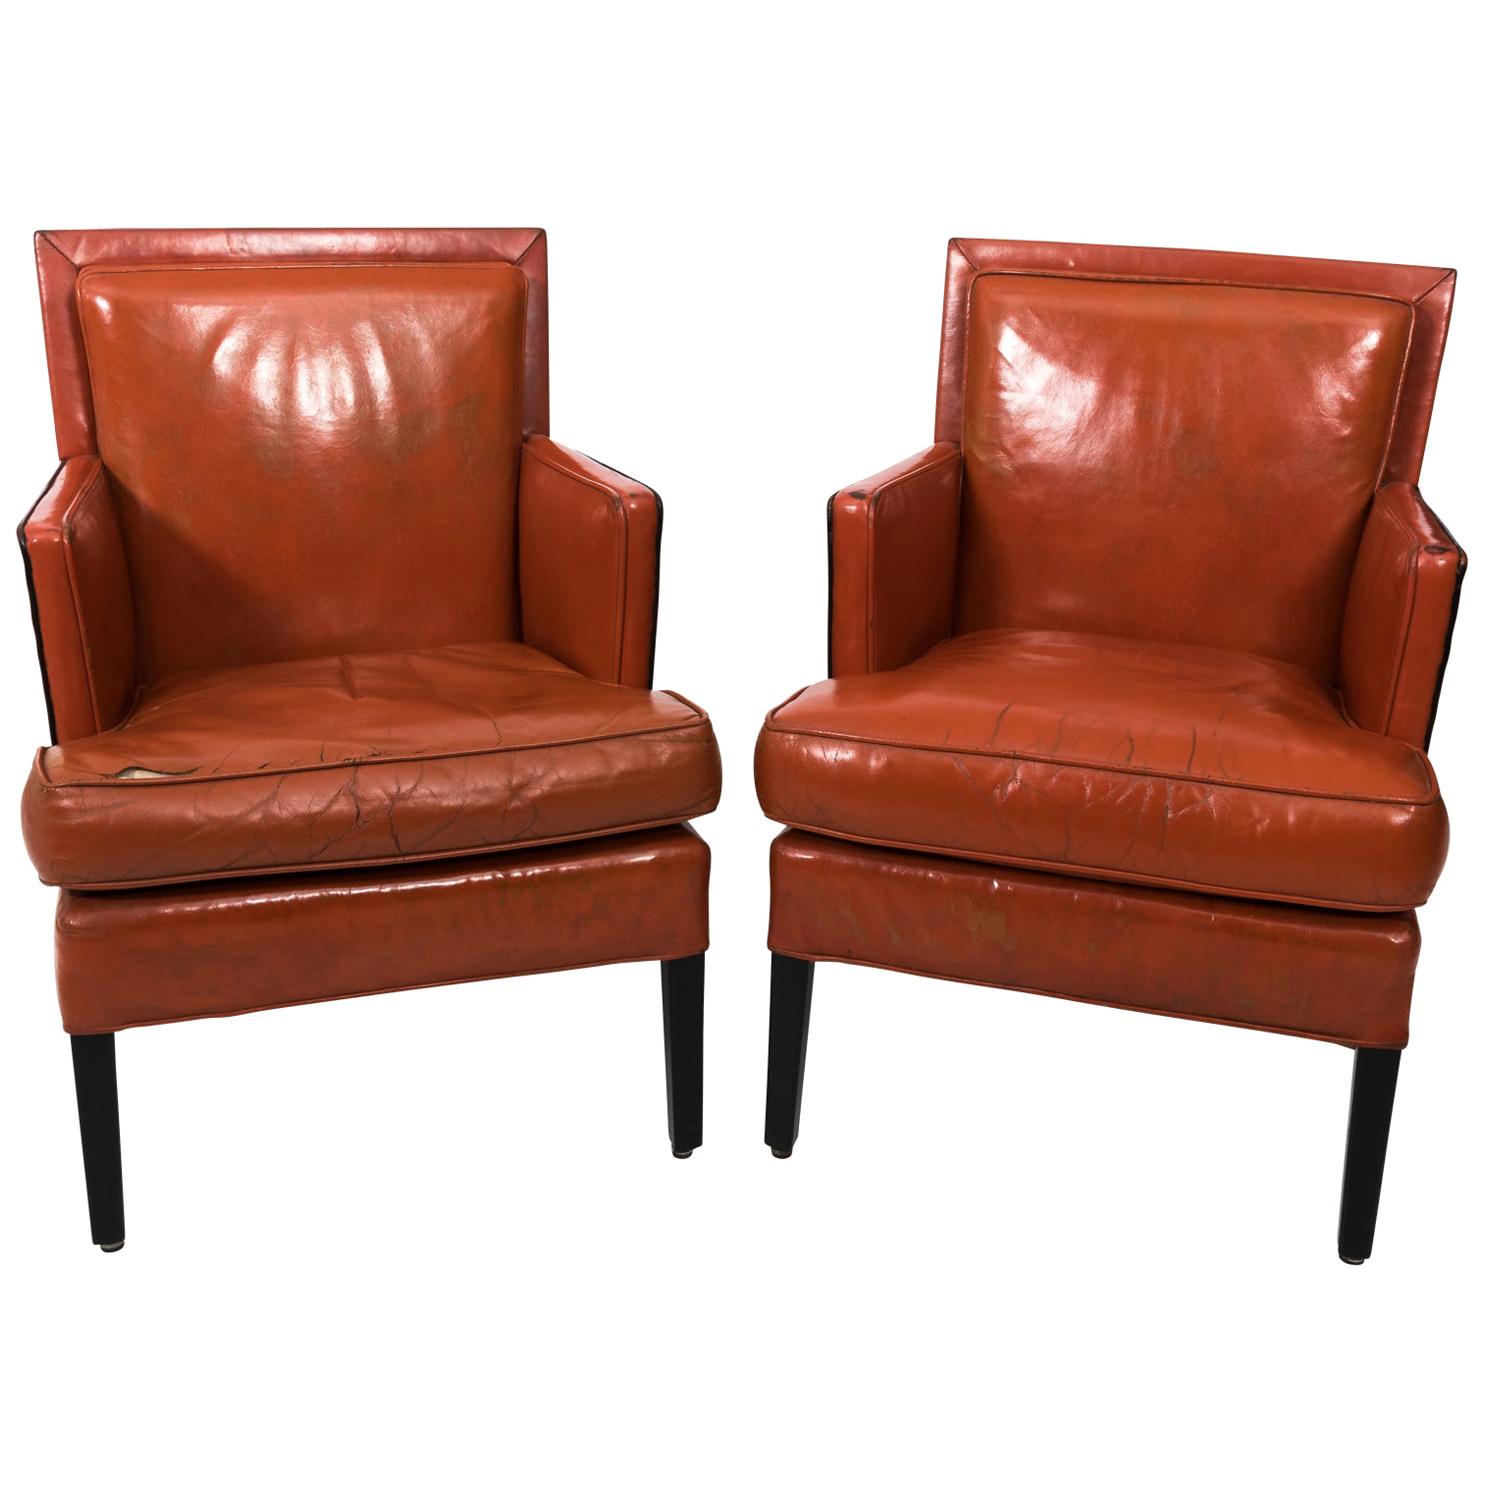 Pair of 1940s Leather Ocean Liner Armchairs For Sale